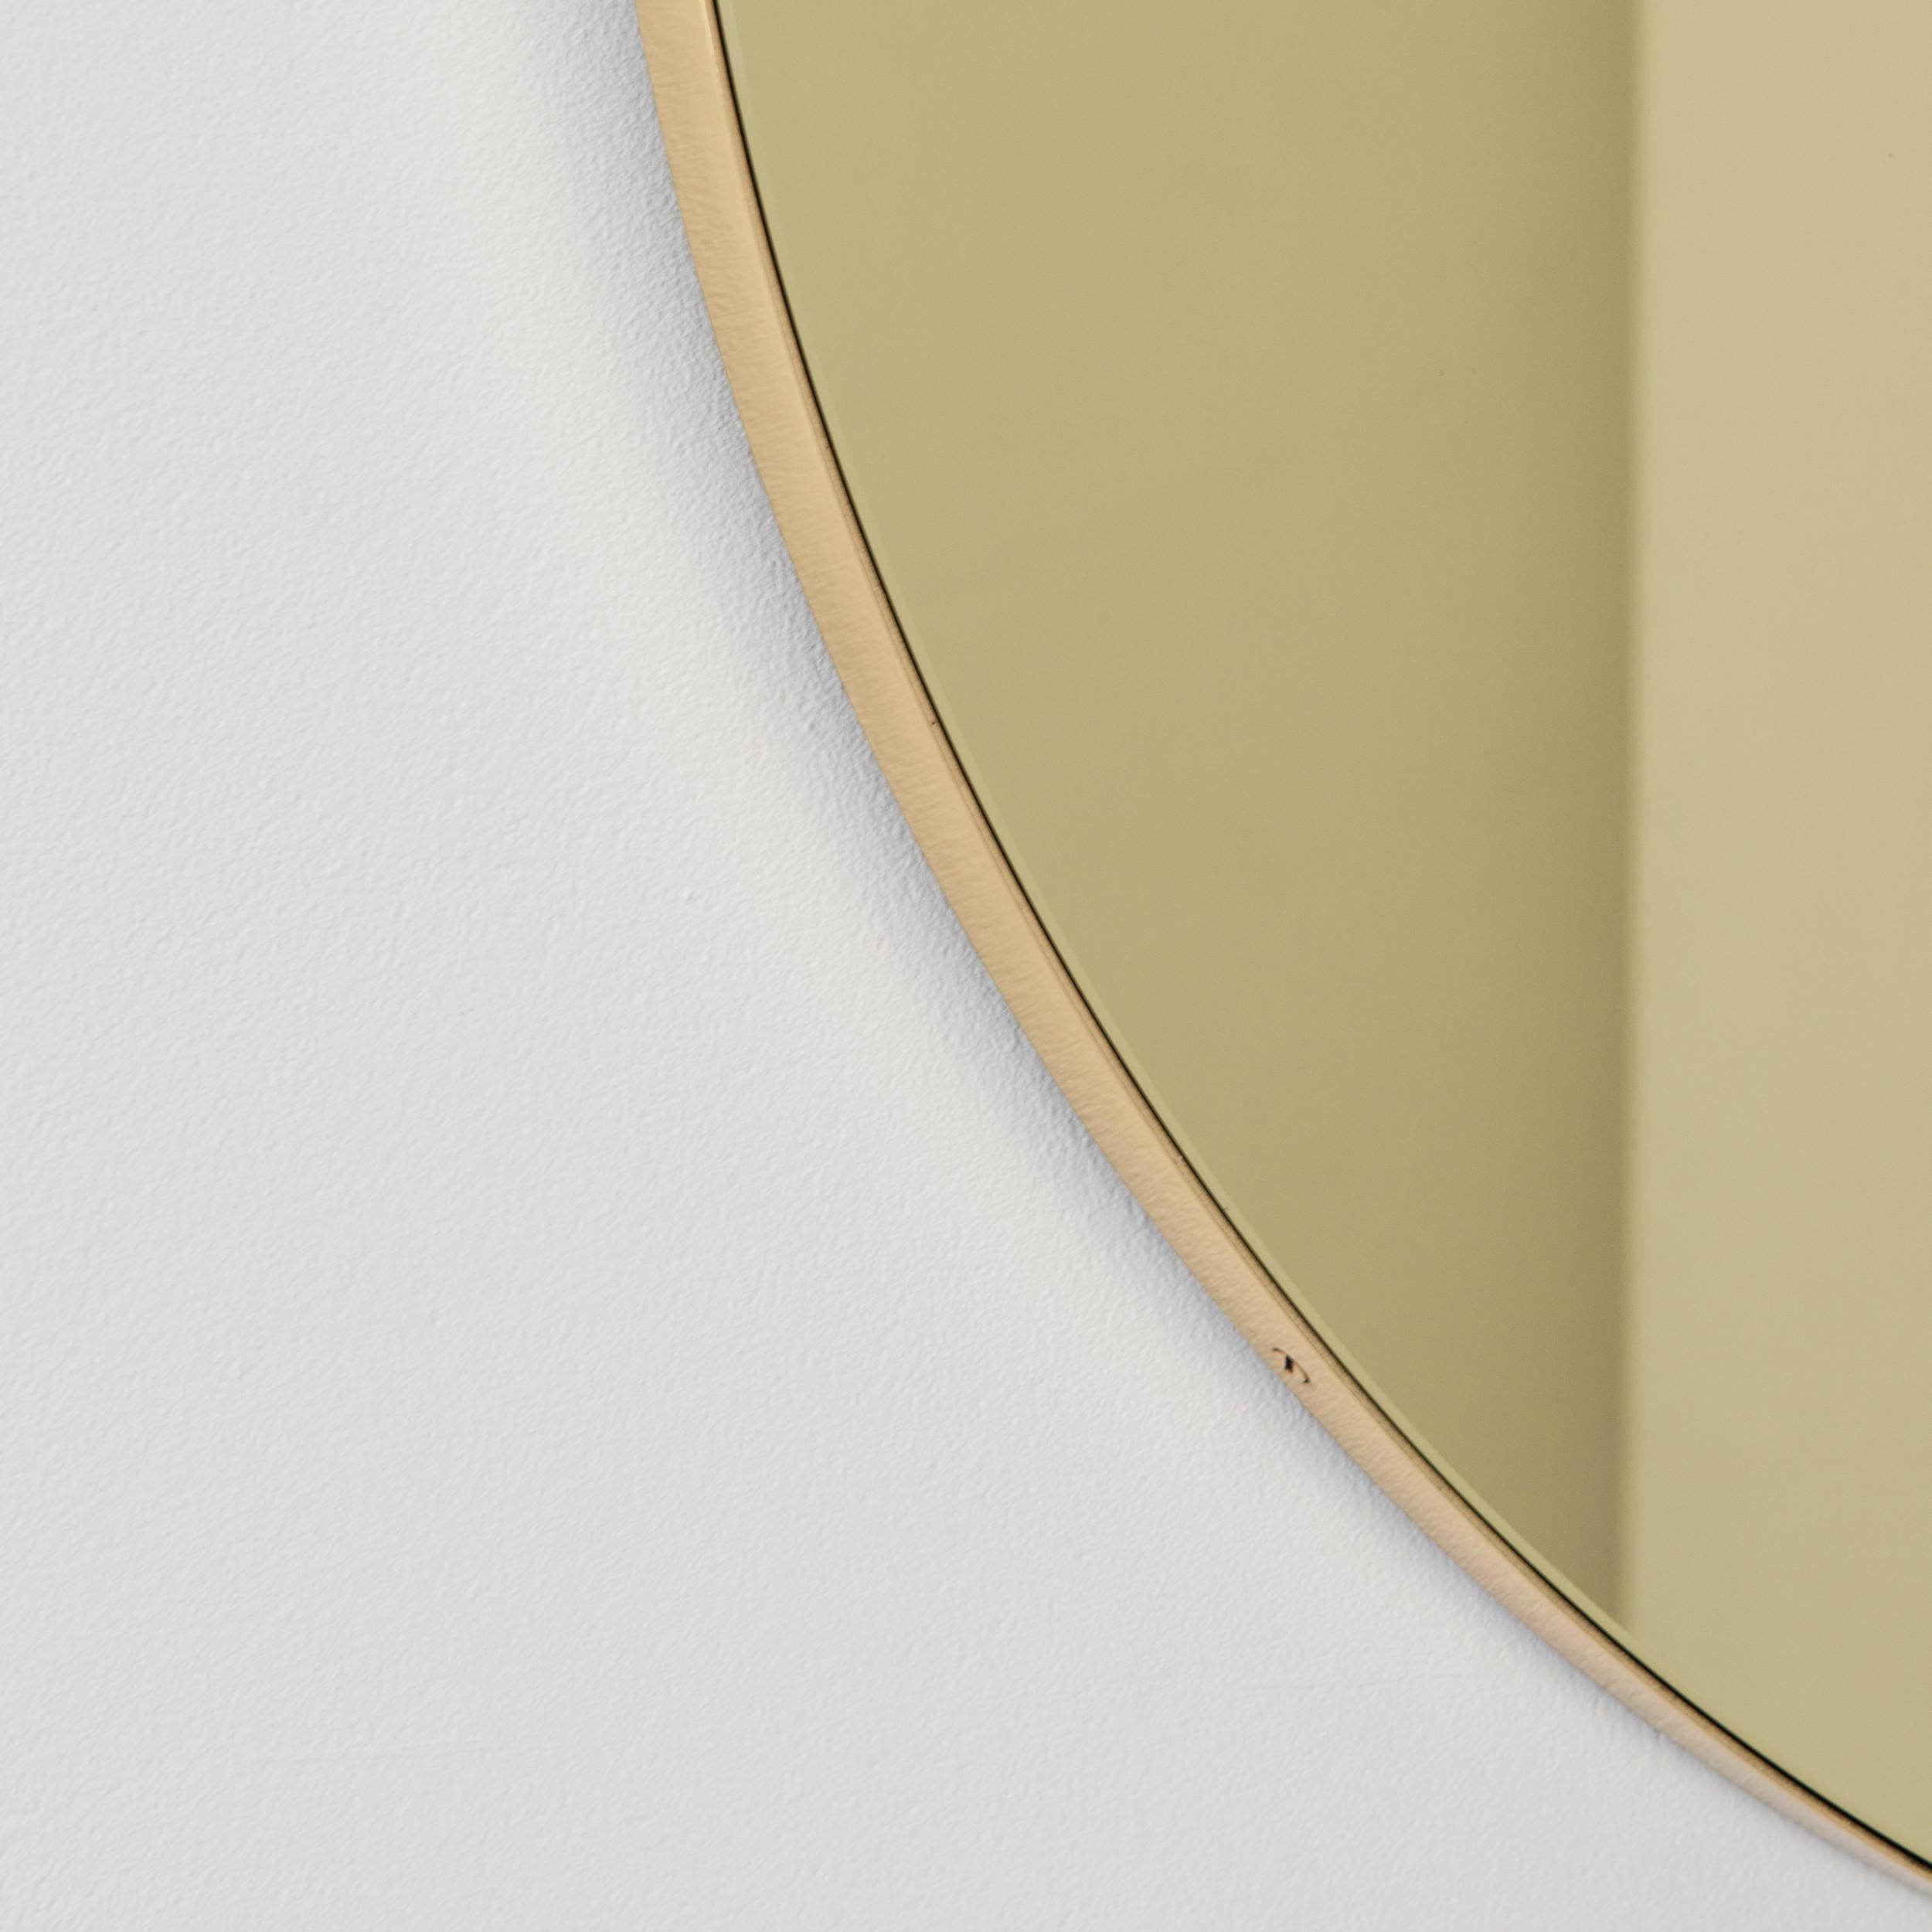 In Stock Orbis Gold Tinted Round Contemporary Mirror, Brass Frame, Medium For Sale 1